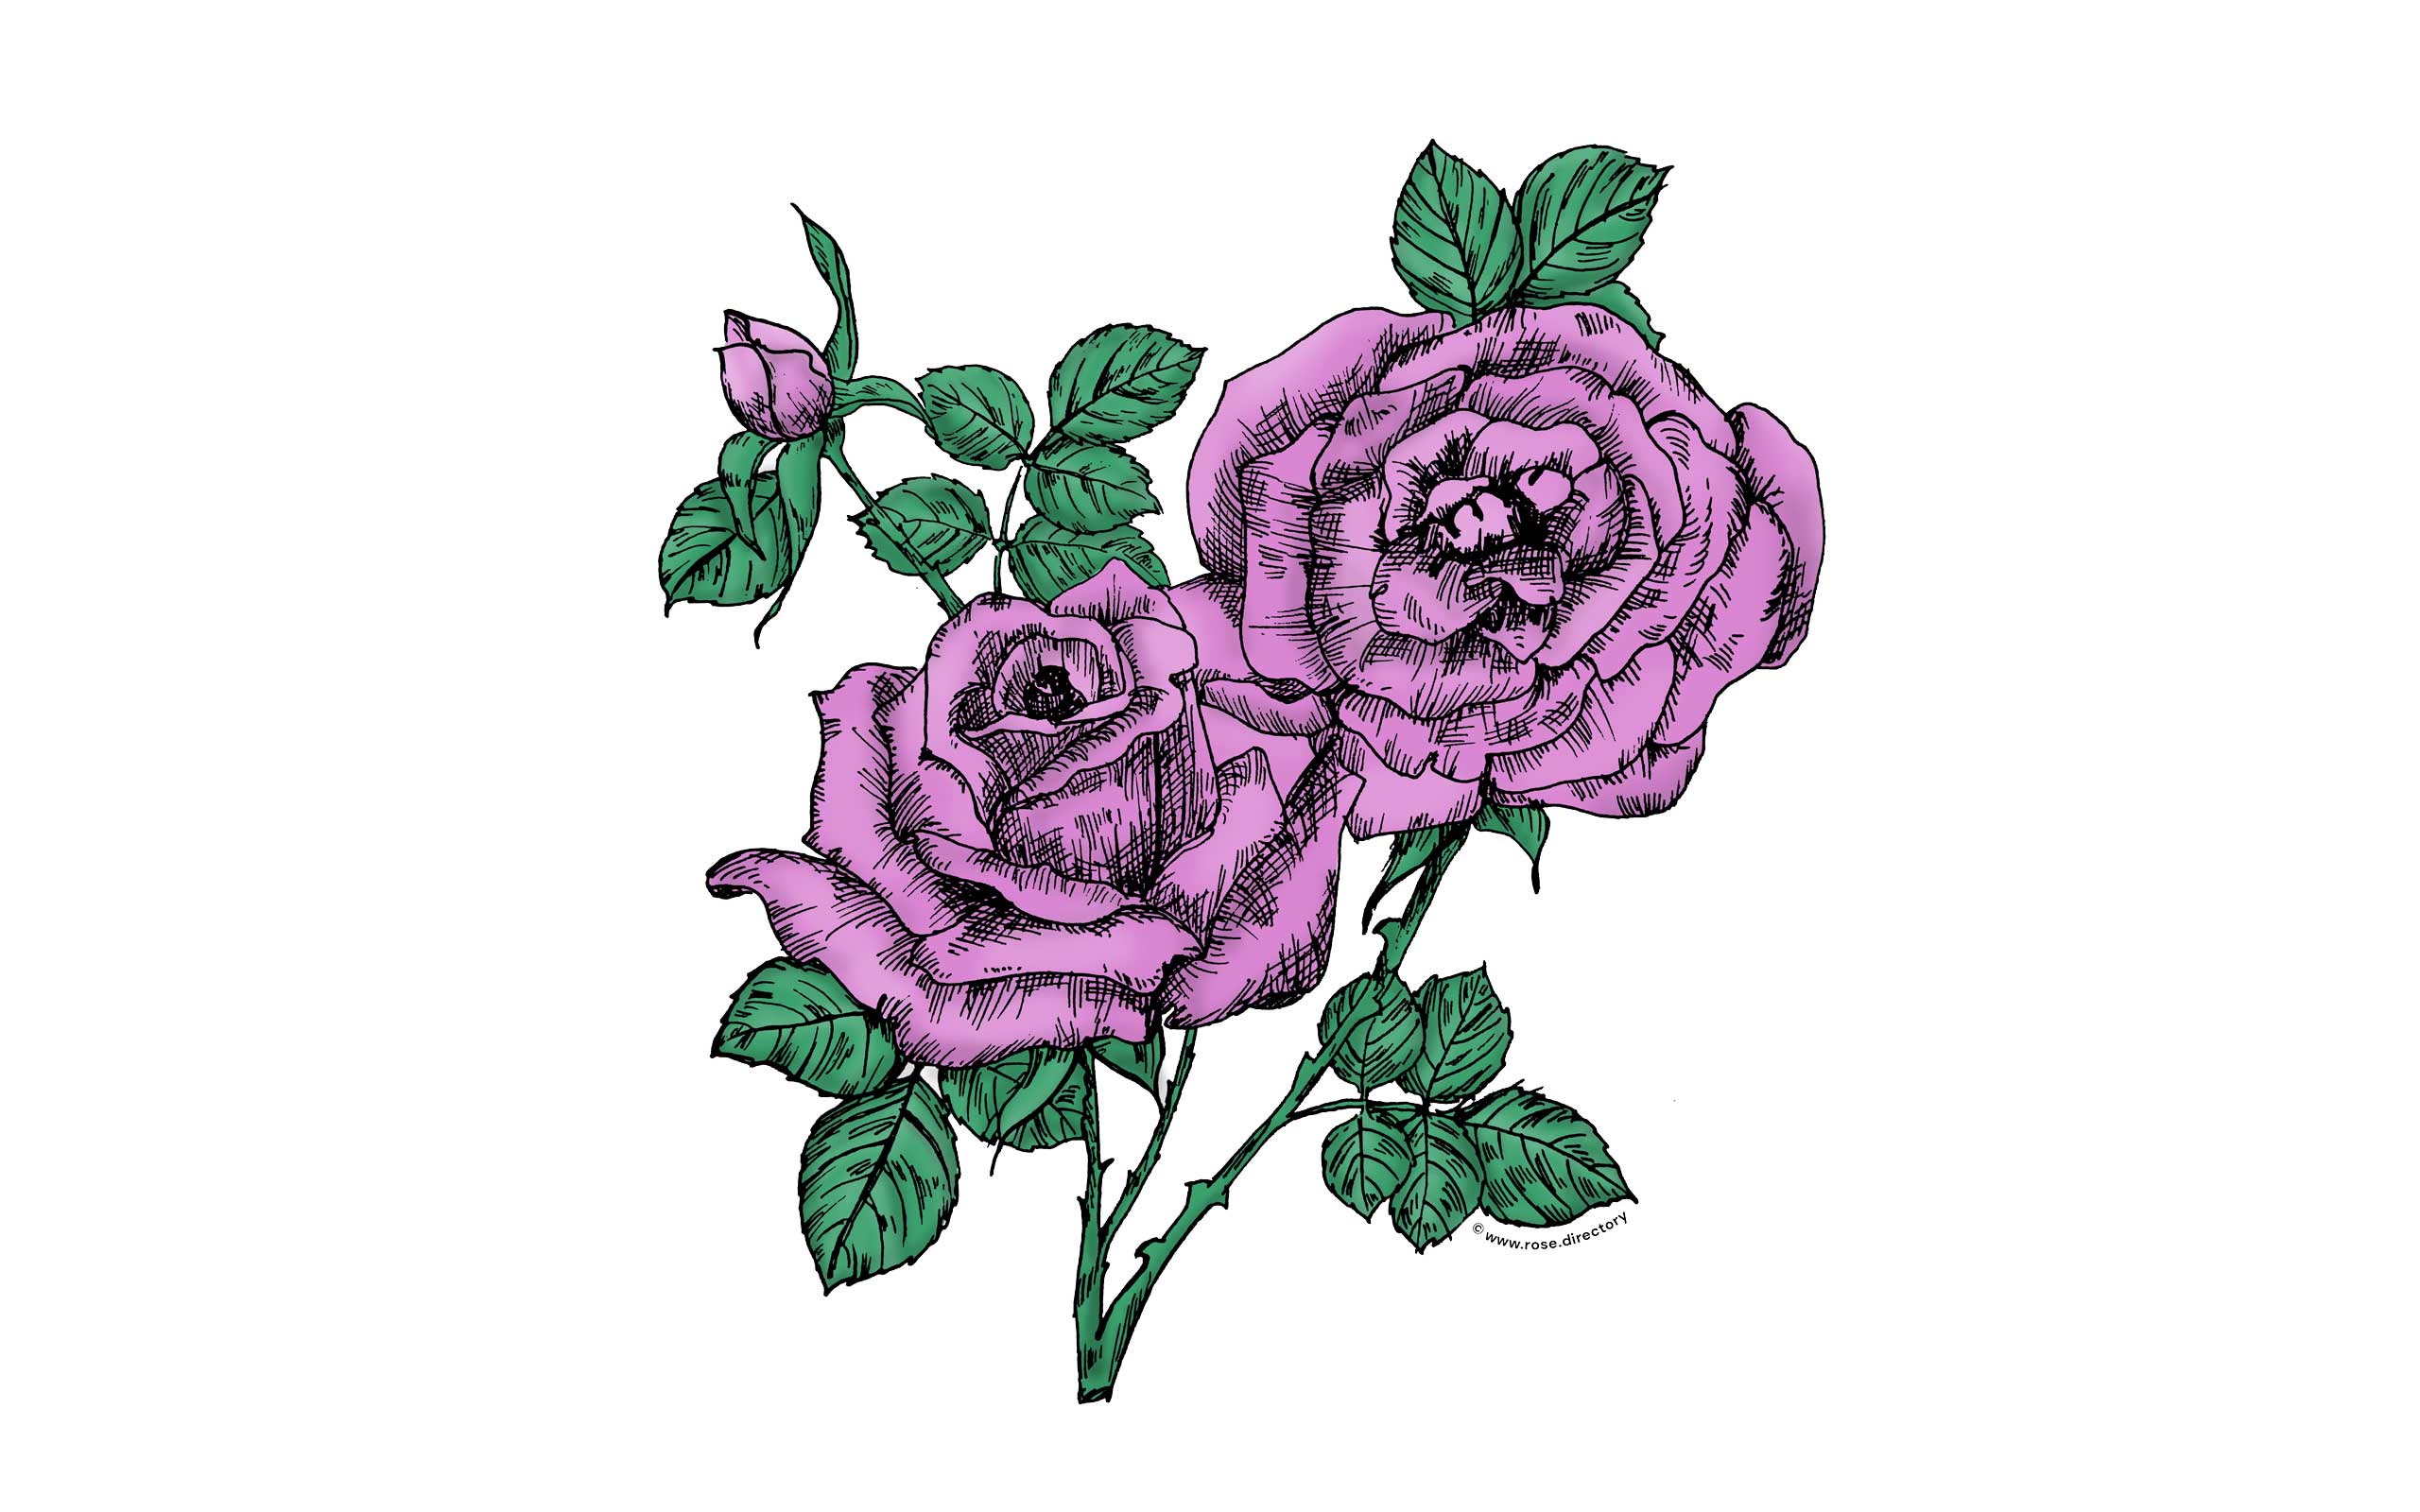 Purple High-Centered Rose Bloom Full 26-40 Petals In 3+ Rows